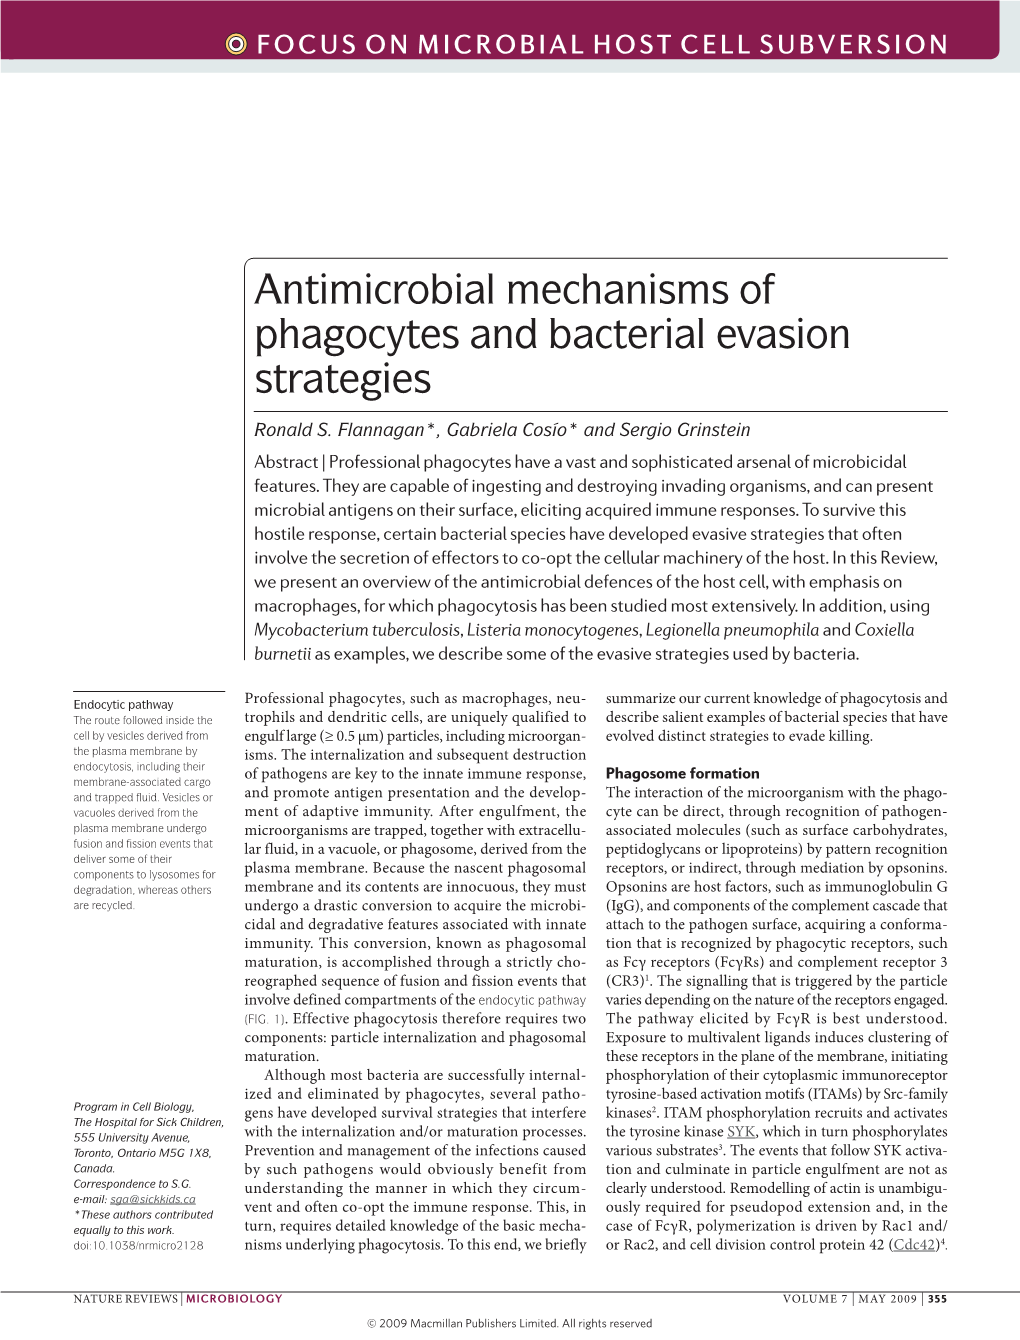 Antimicrobial Mechanisms of Phagocytes and Bacterial Evasion Strategies